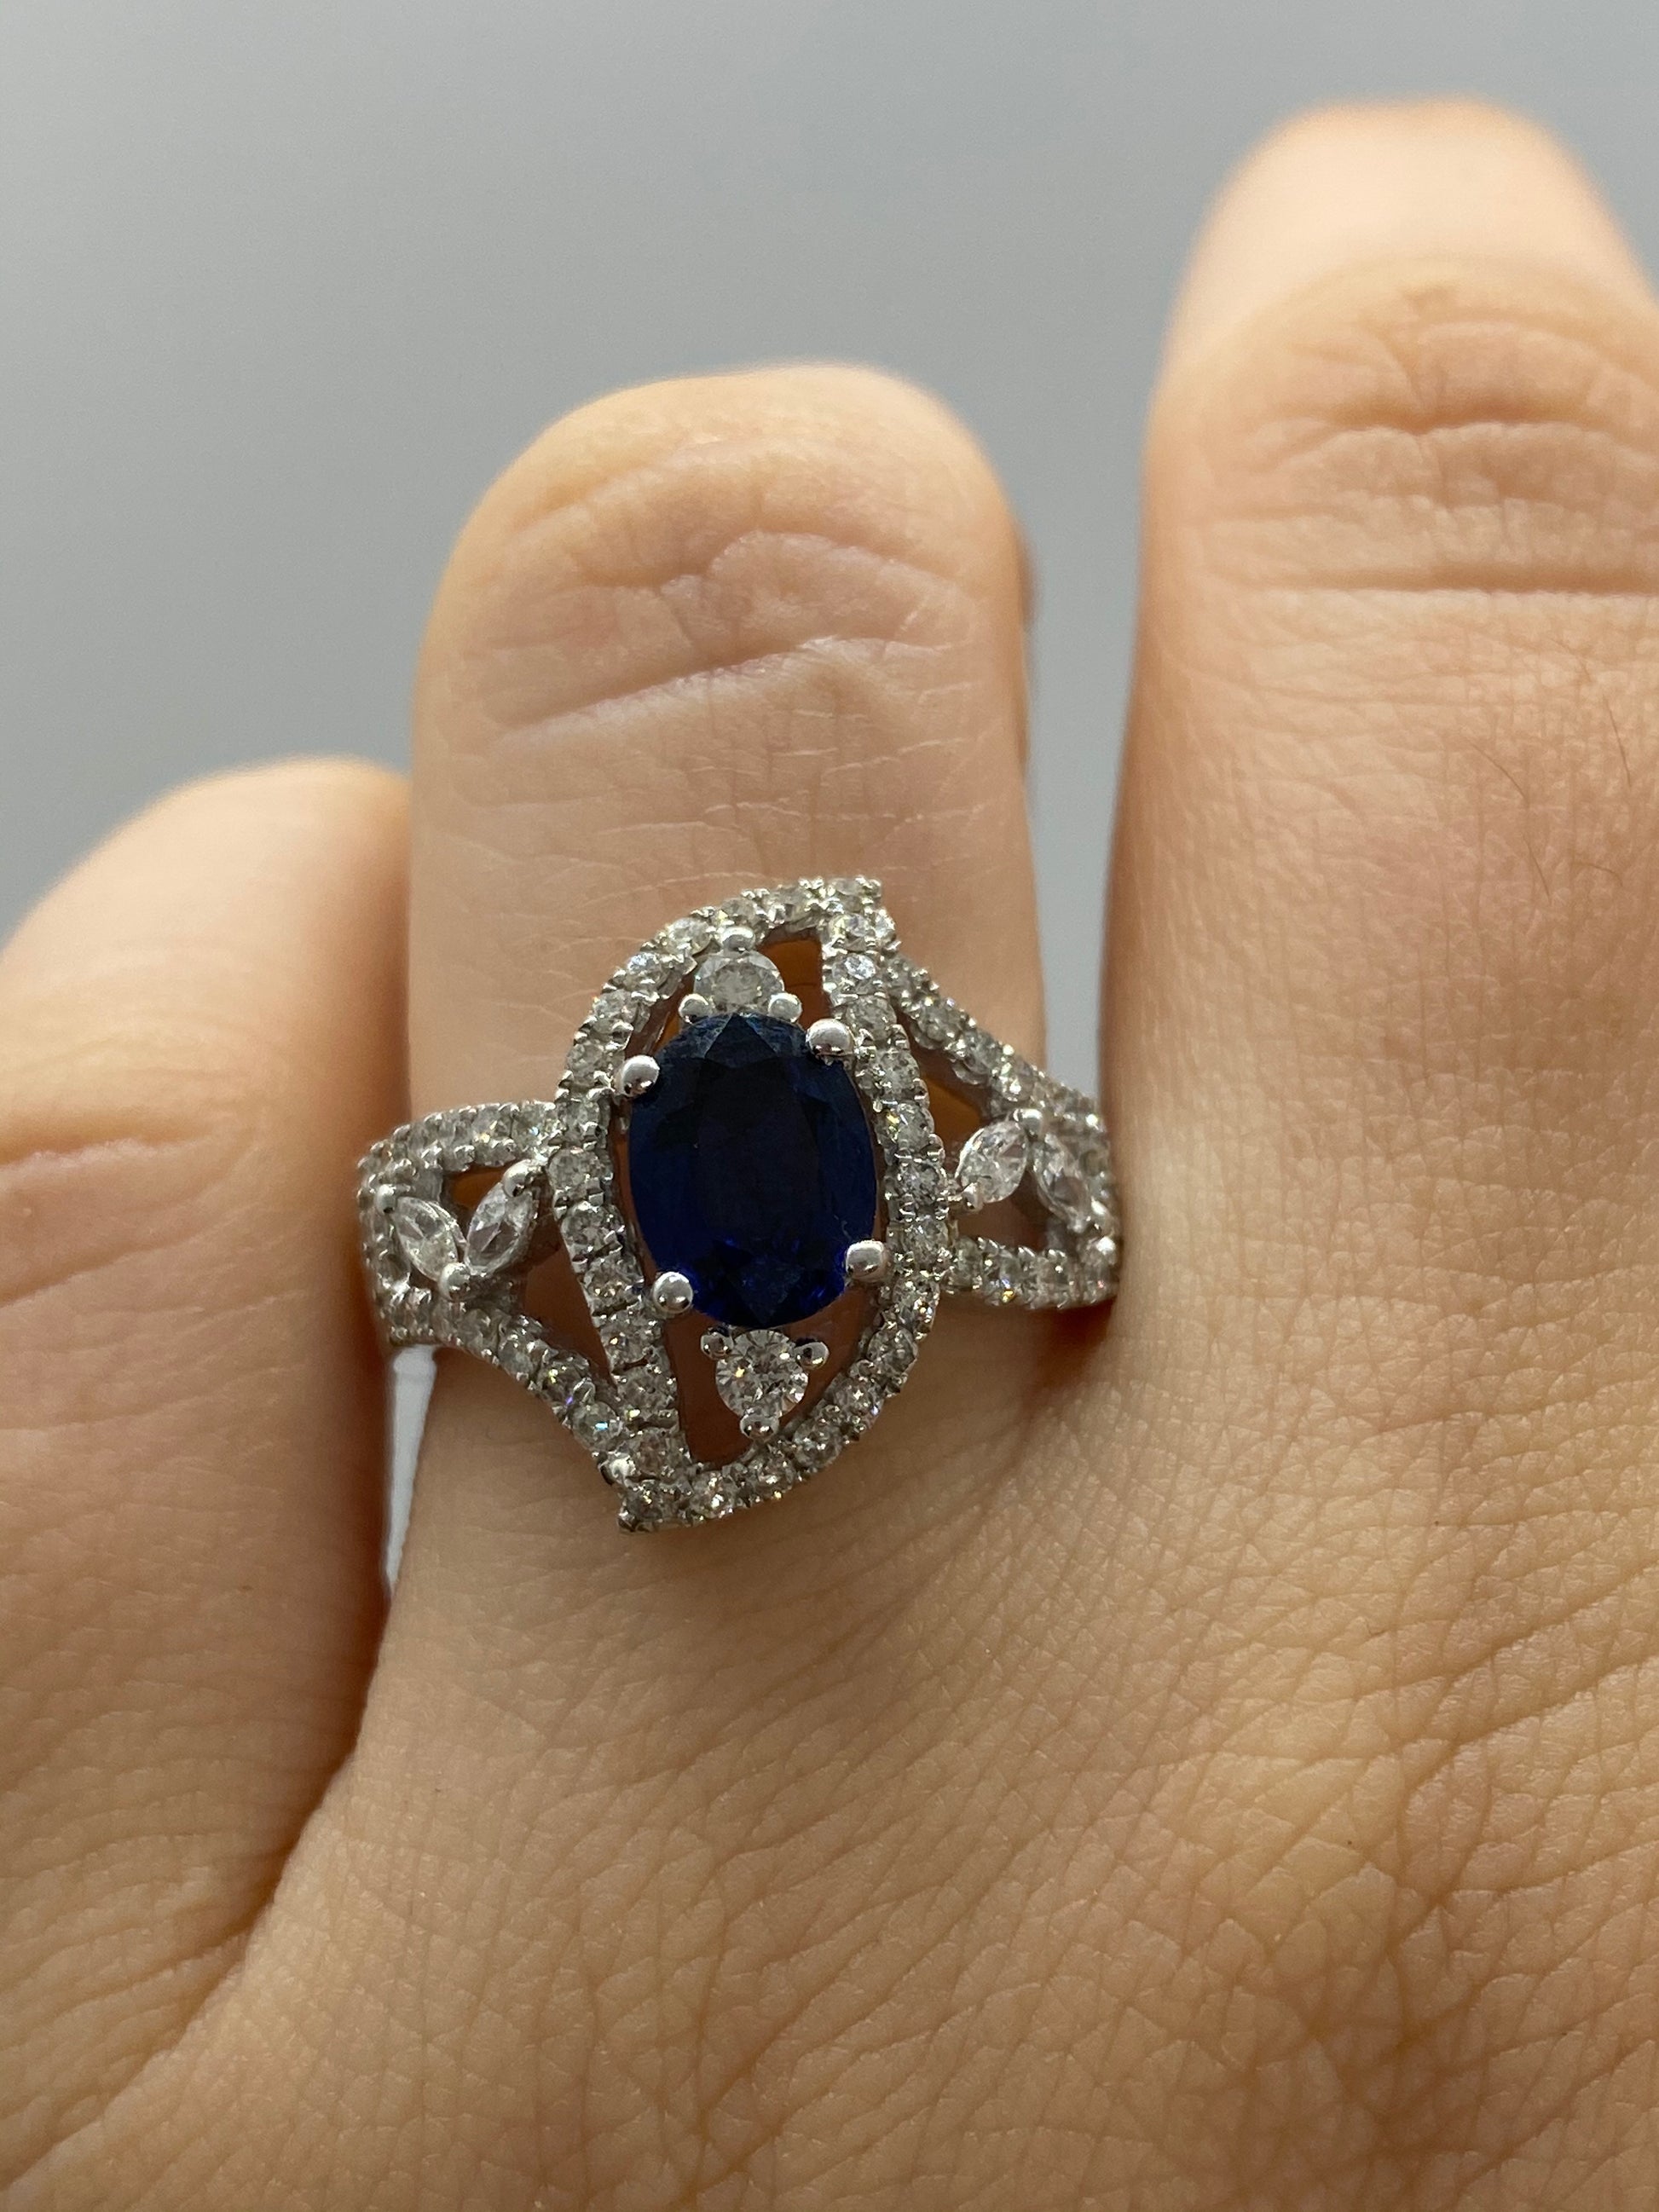 Blue sapphire Ring R14937 - Royal Gems and Jewelry